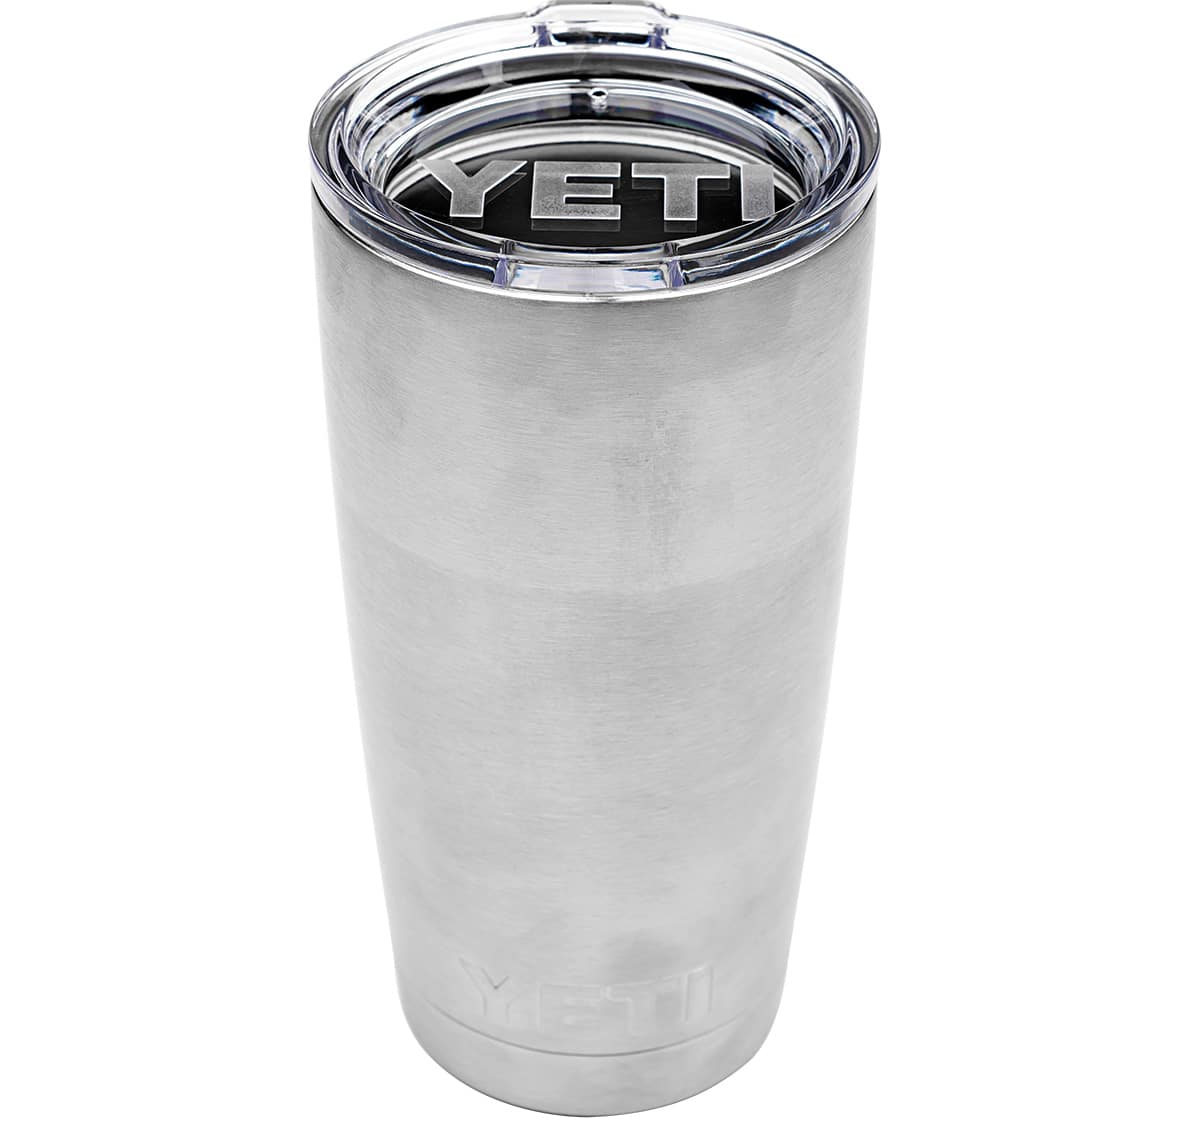 I tried the Stanley cup and Yeti Rambler. How do they compare